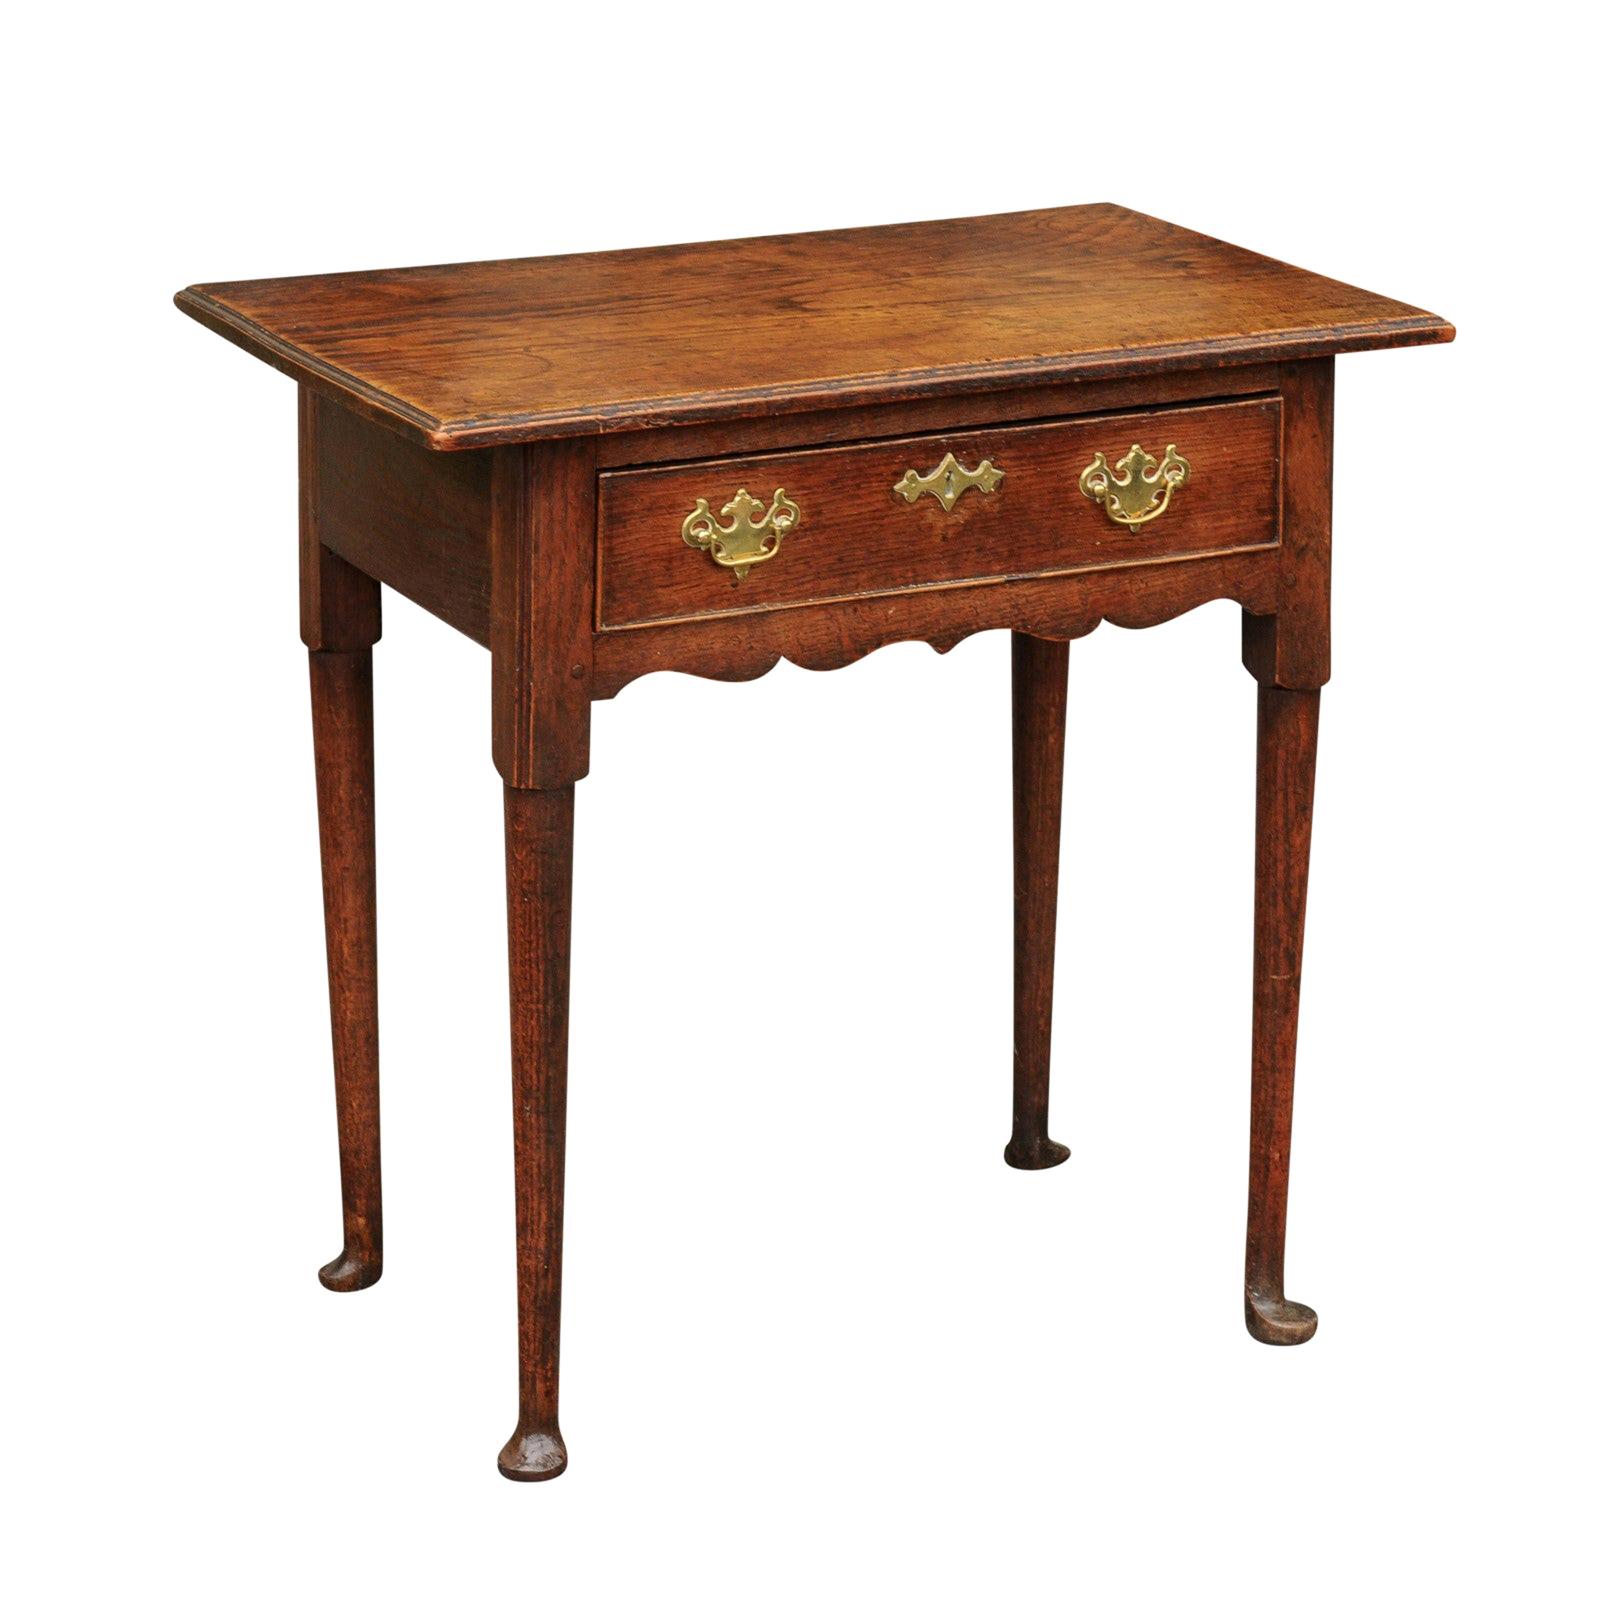 English George III Period 1800s Oak Side Table with Single Drawer and Pad Feet